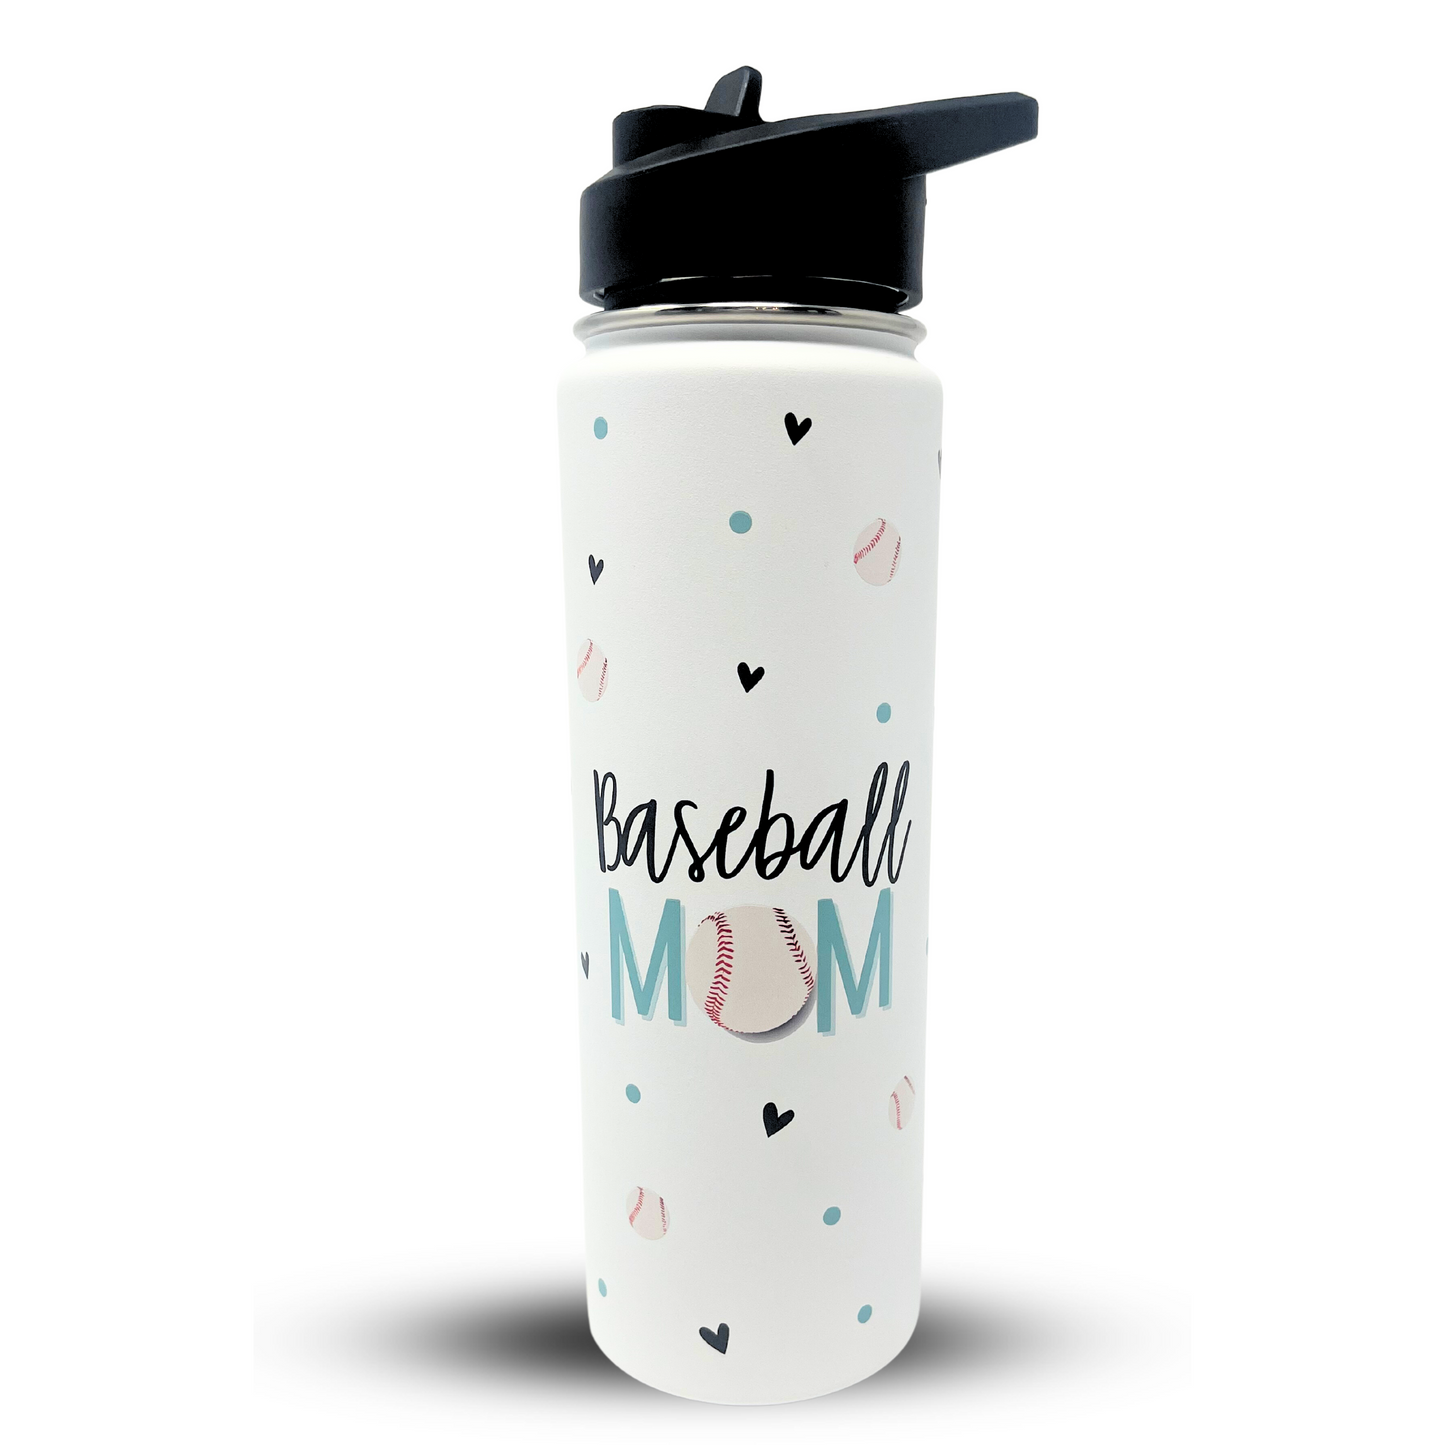 Stainless Steel Insulated Water Bottle - Large Vacuum Cup For Hot